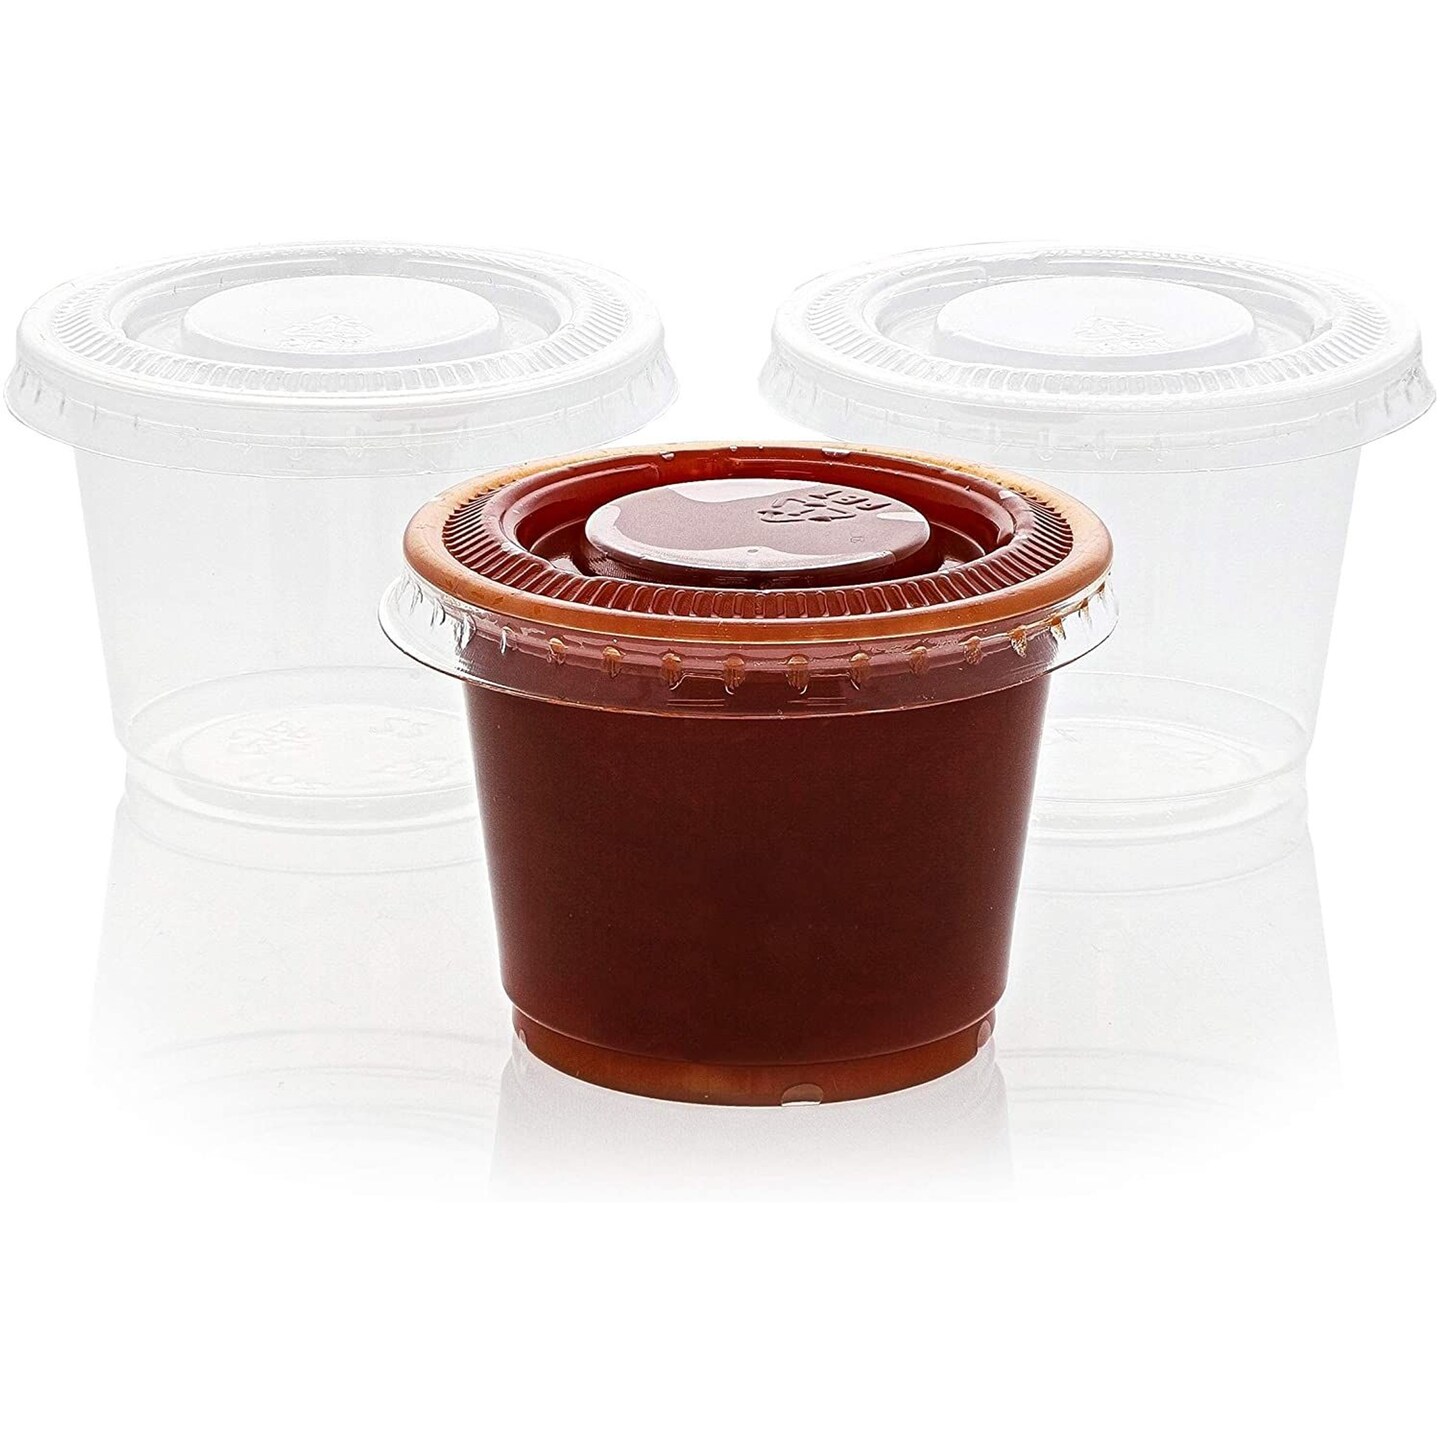 1 oz. Salad Dressing Containers Set